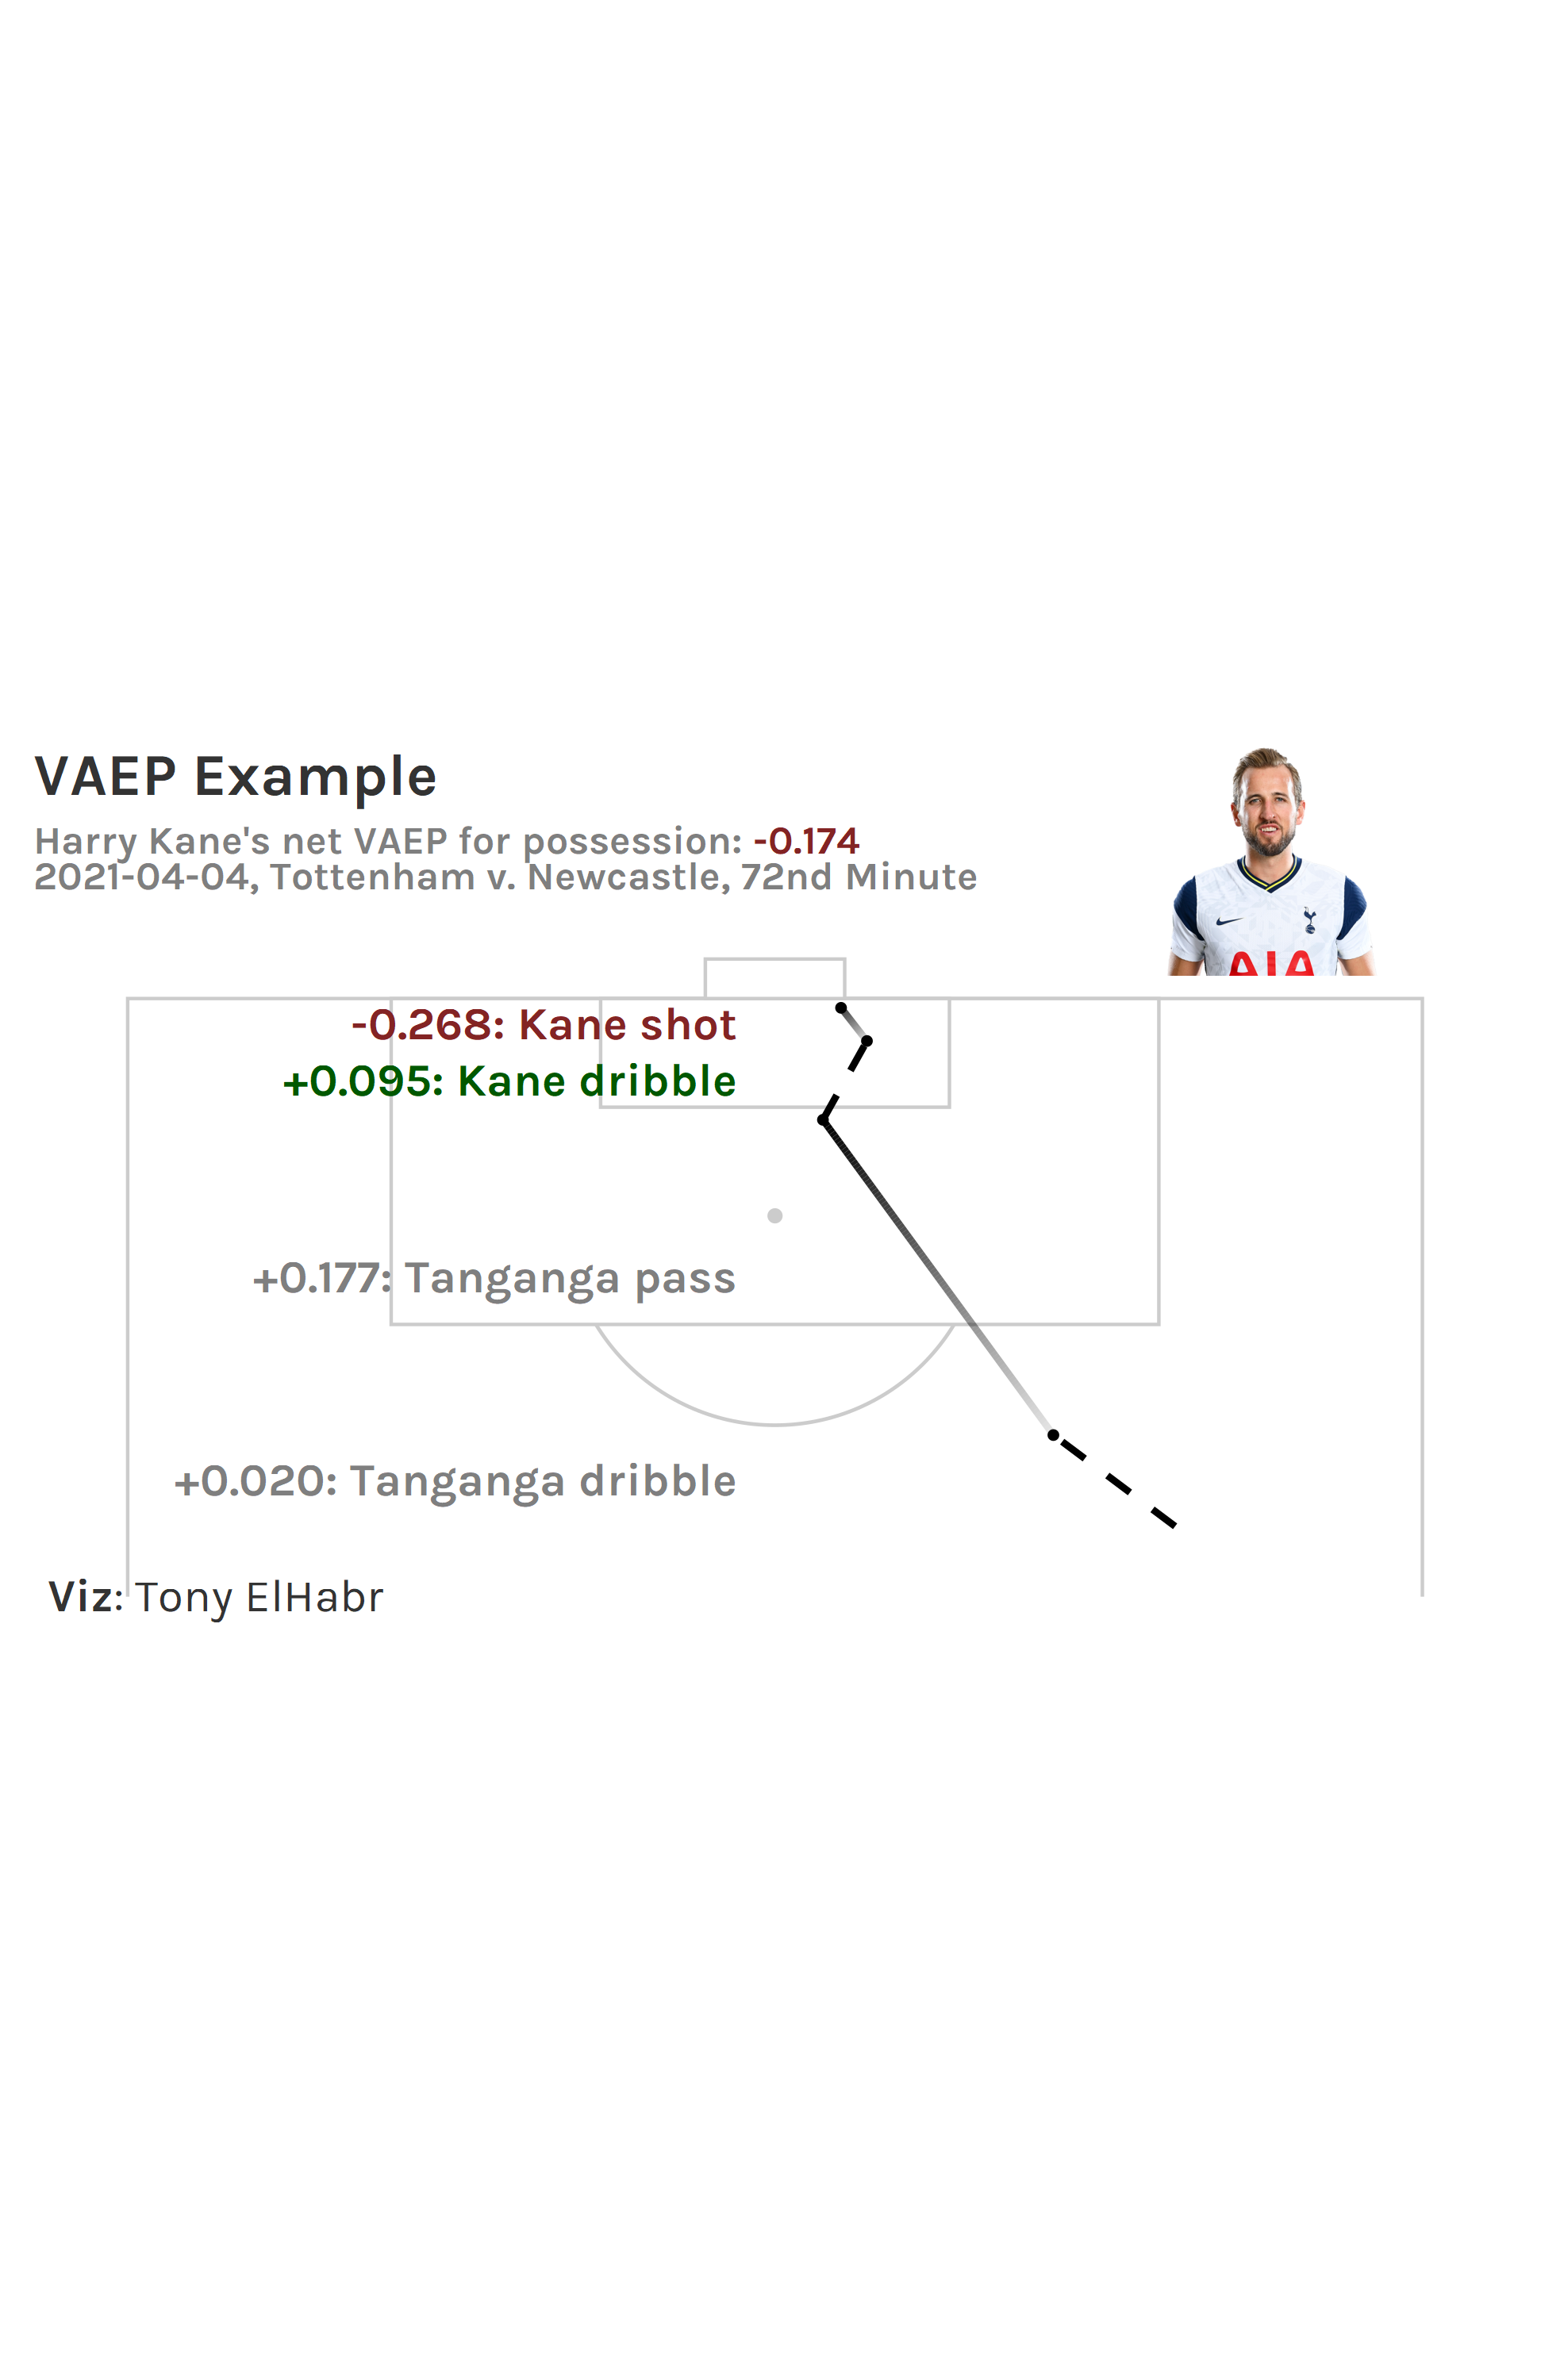 Example of how VAEP scores each action in a possession. Example comes from a 2021-04-04 match between Tottenham and Newcastle, in which Kane misses a shot and gets net negative VAEP.